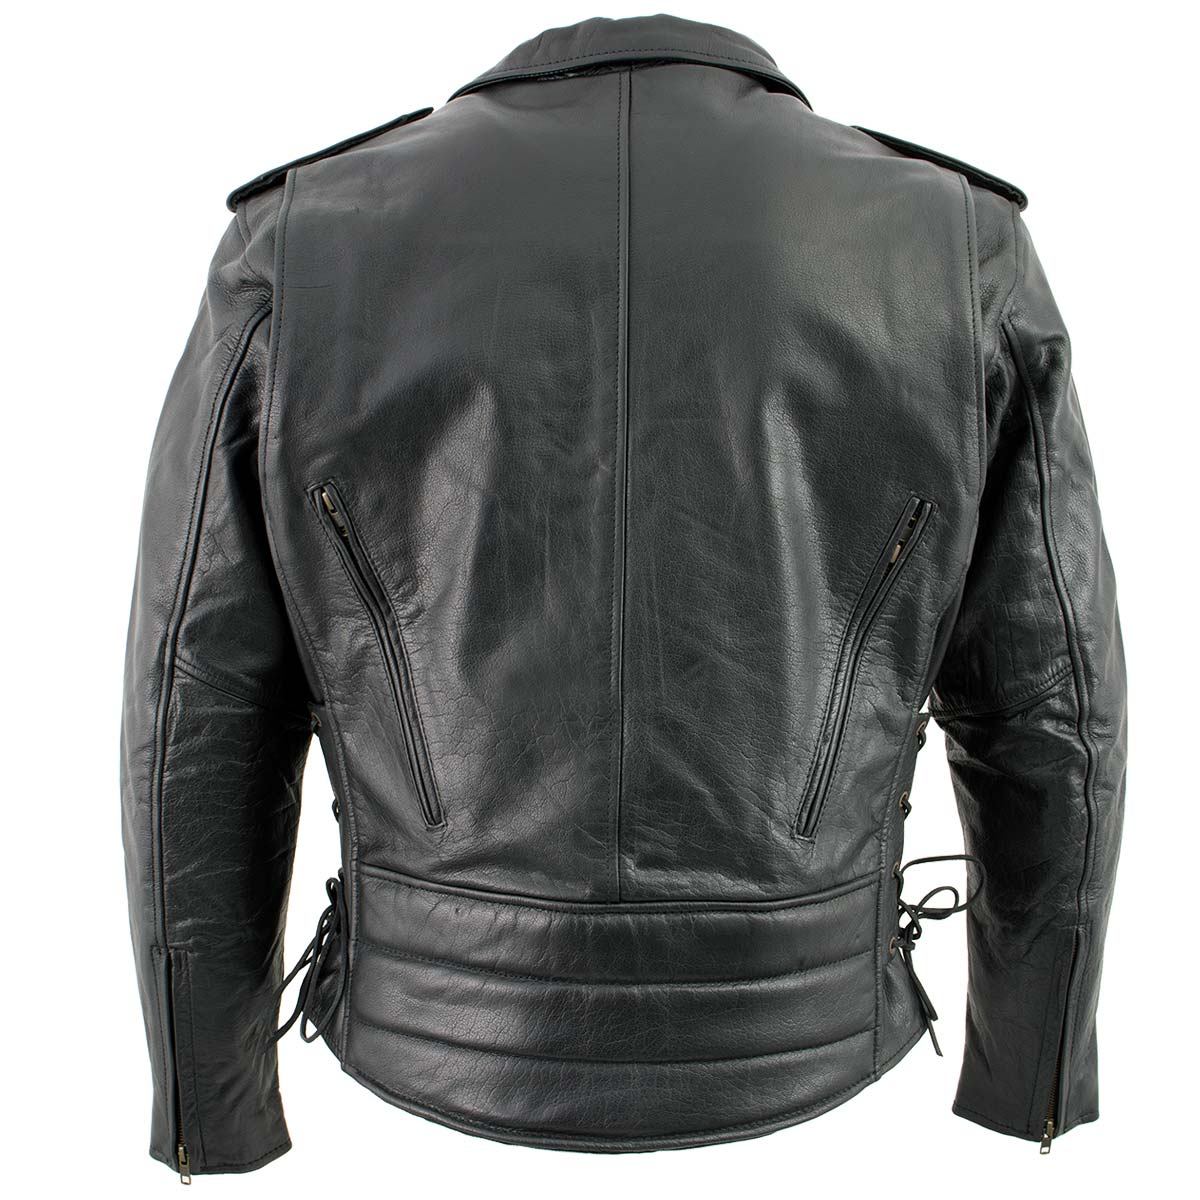 Xelement B7210 'Cool Rider' Men's Black Vented Leather